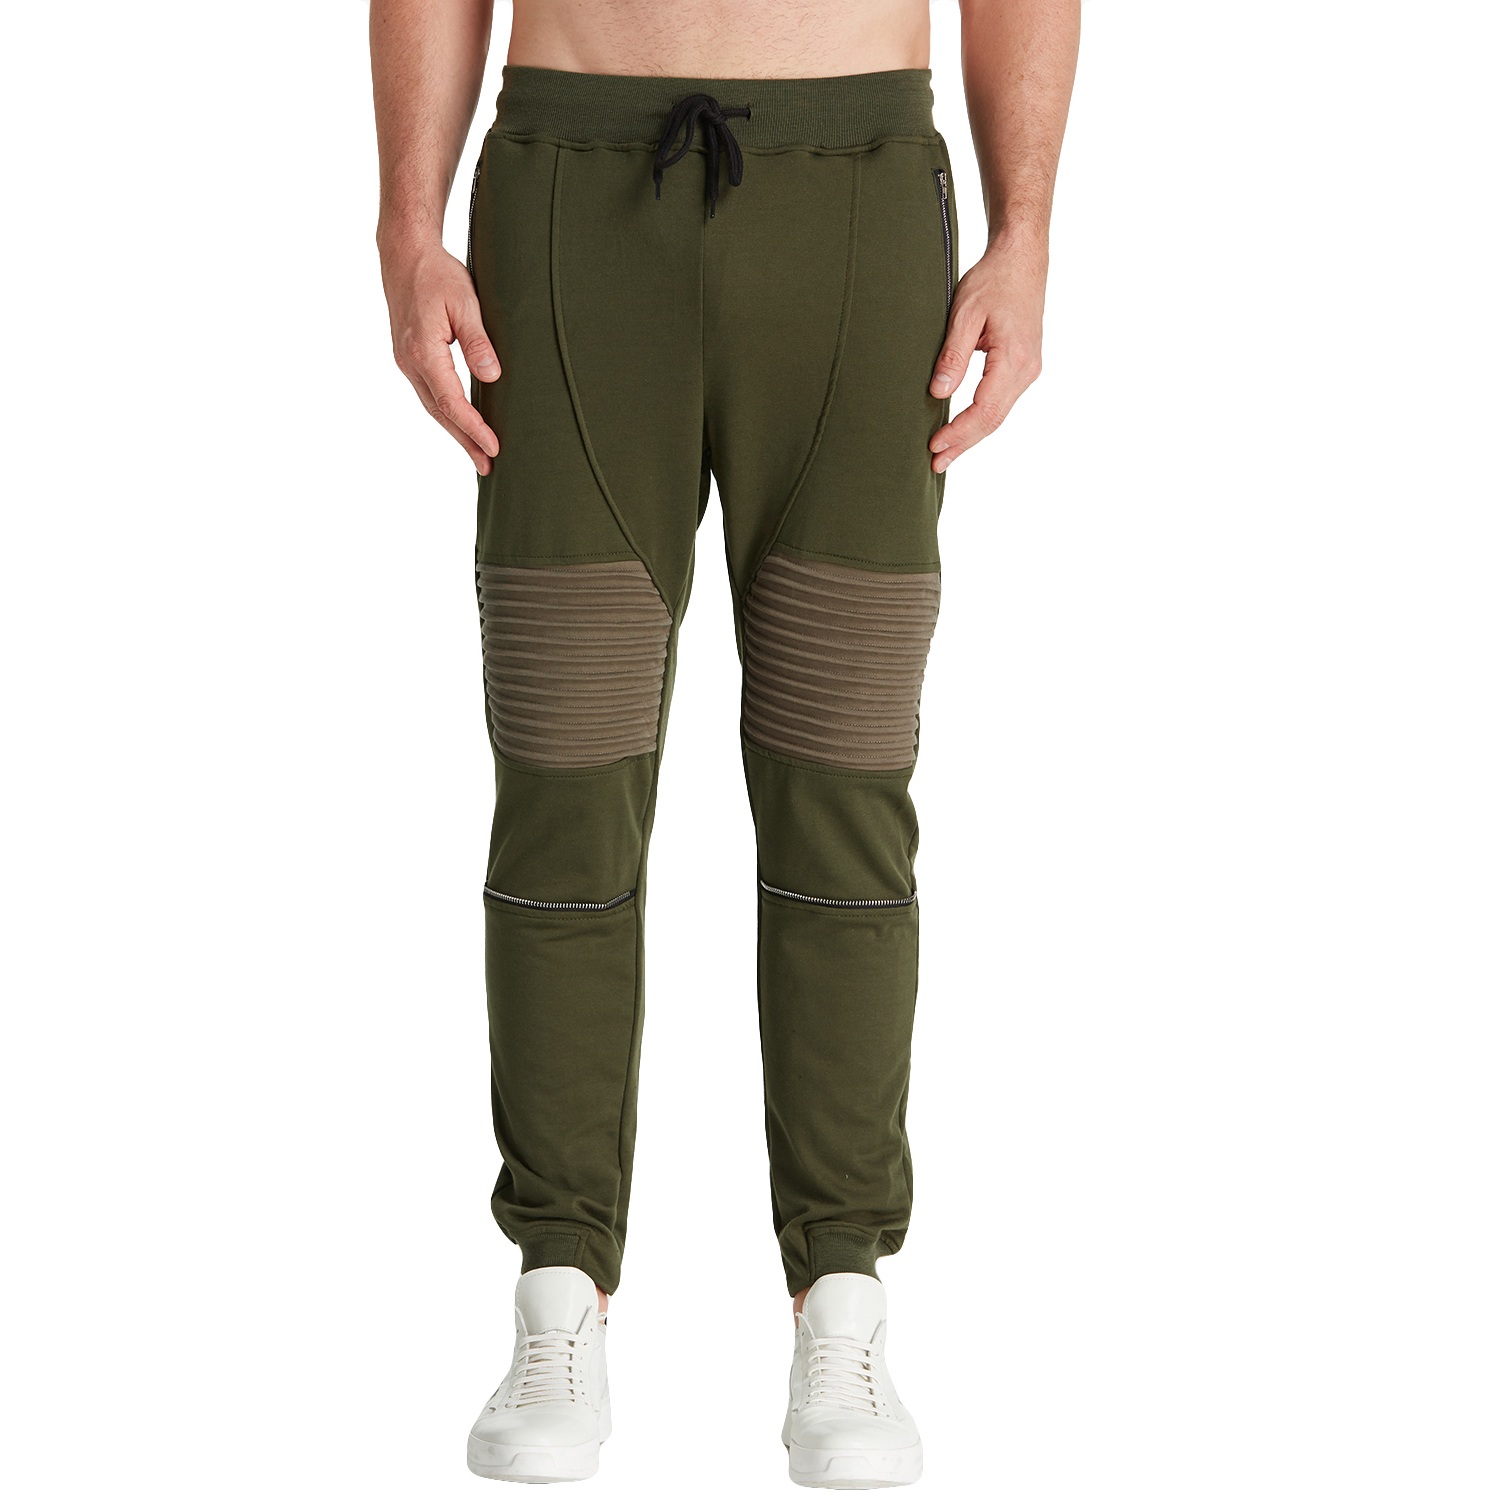 Mens-Yoga-Fitness-Sports-Pants-Wearable-Breathable-Keep-Warm-Outdoor-Sports-Pants-1550391-4